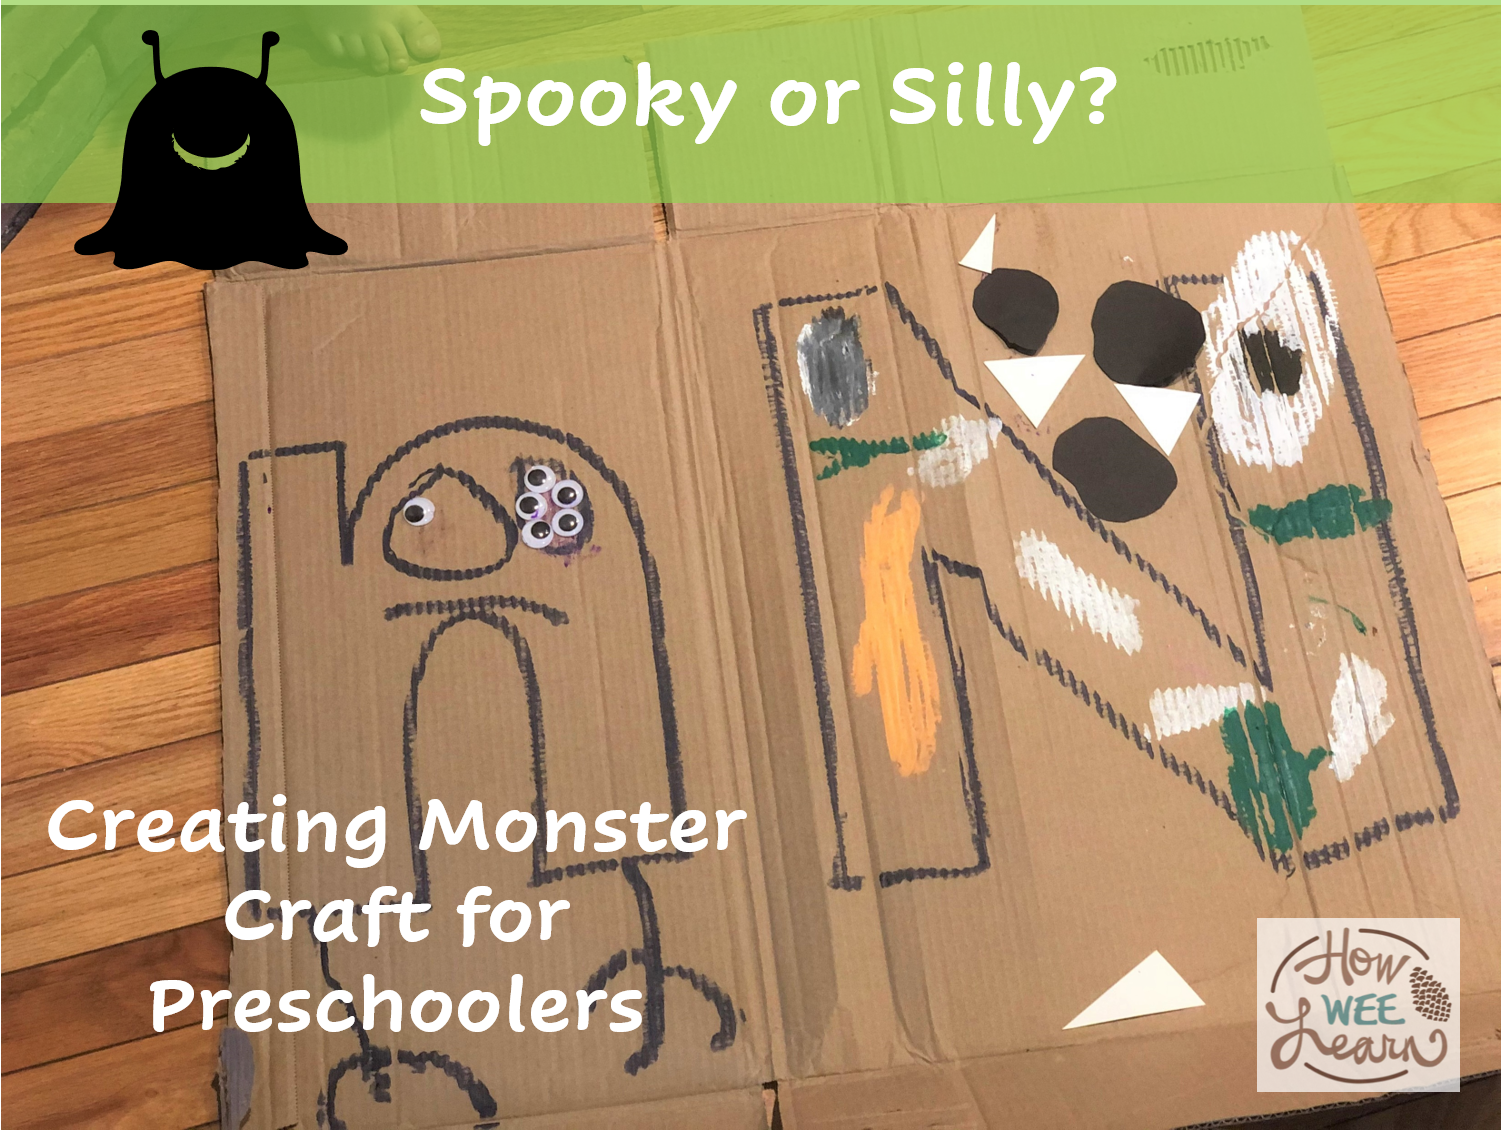 This monster craft for preschoolers is such a fun Halloween craft! Love that it combines learning letters with silly fun and art.